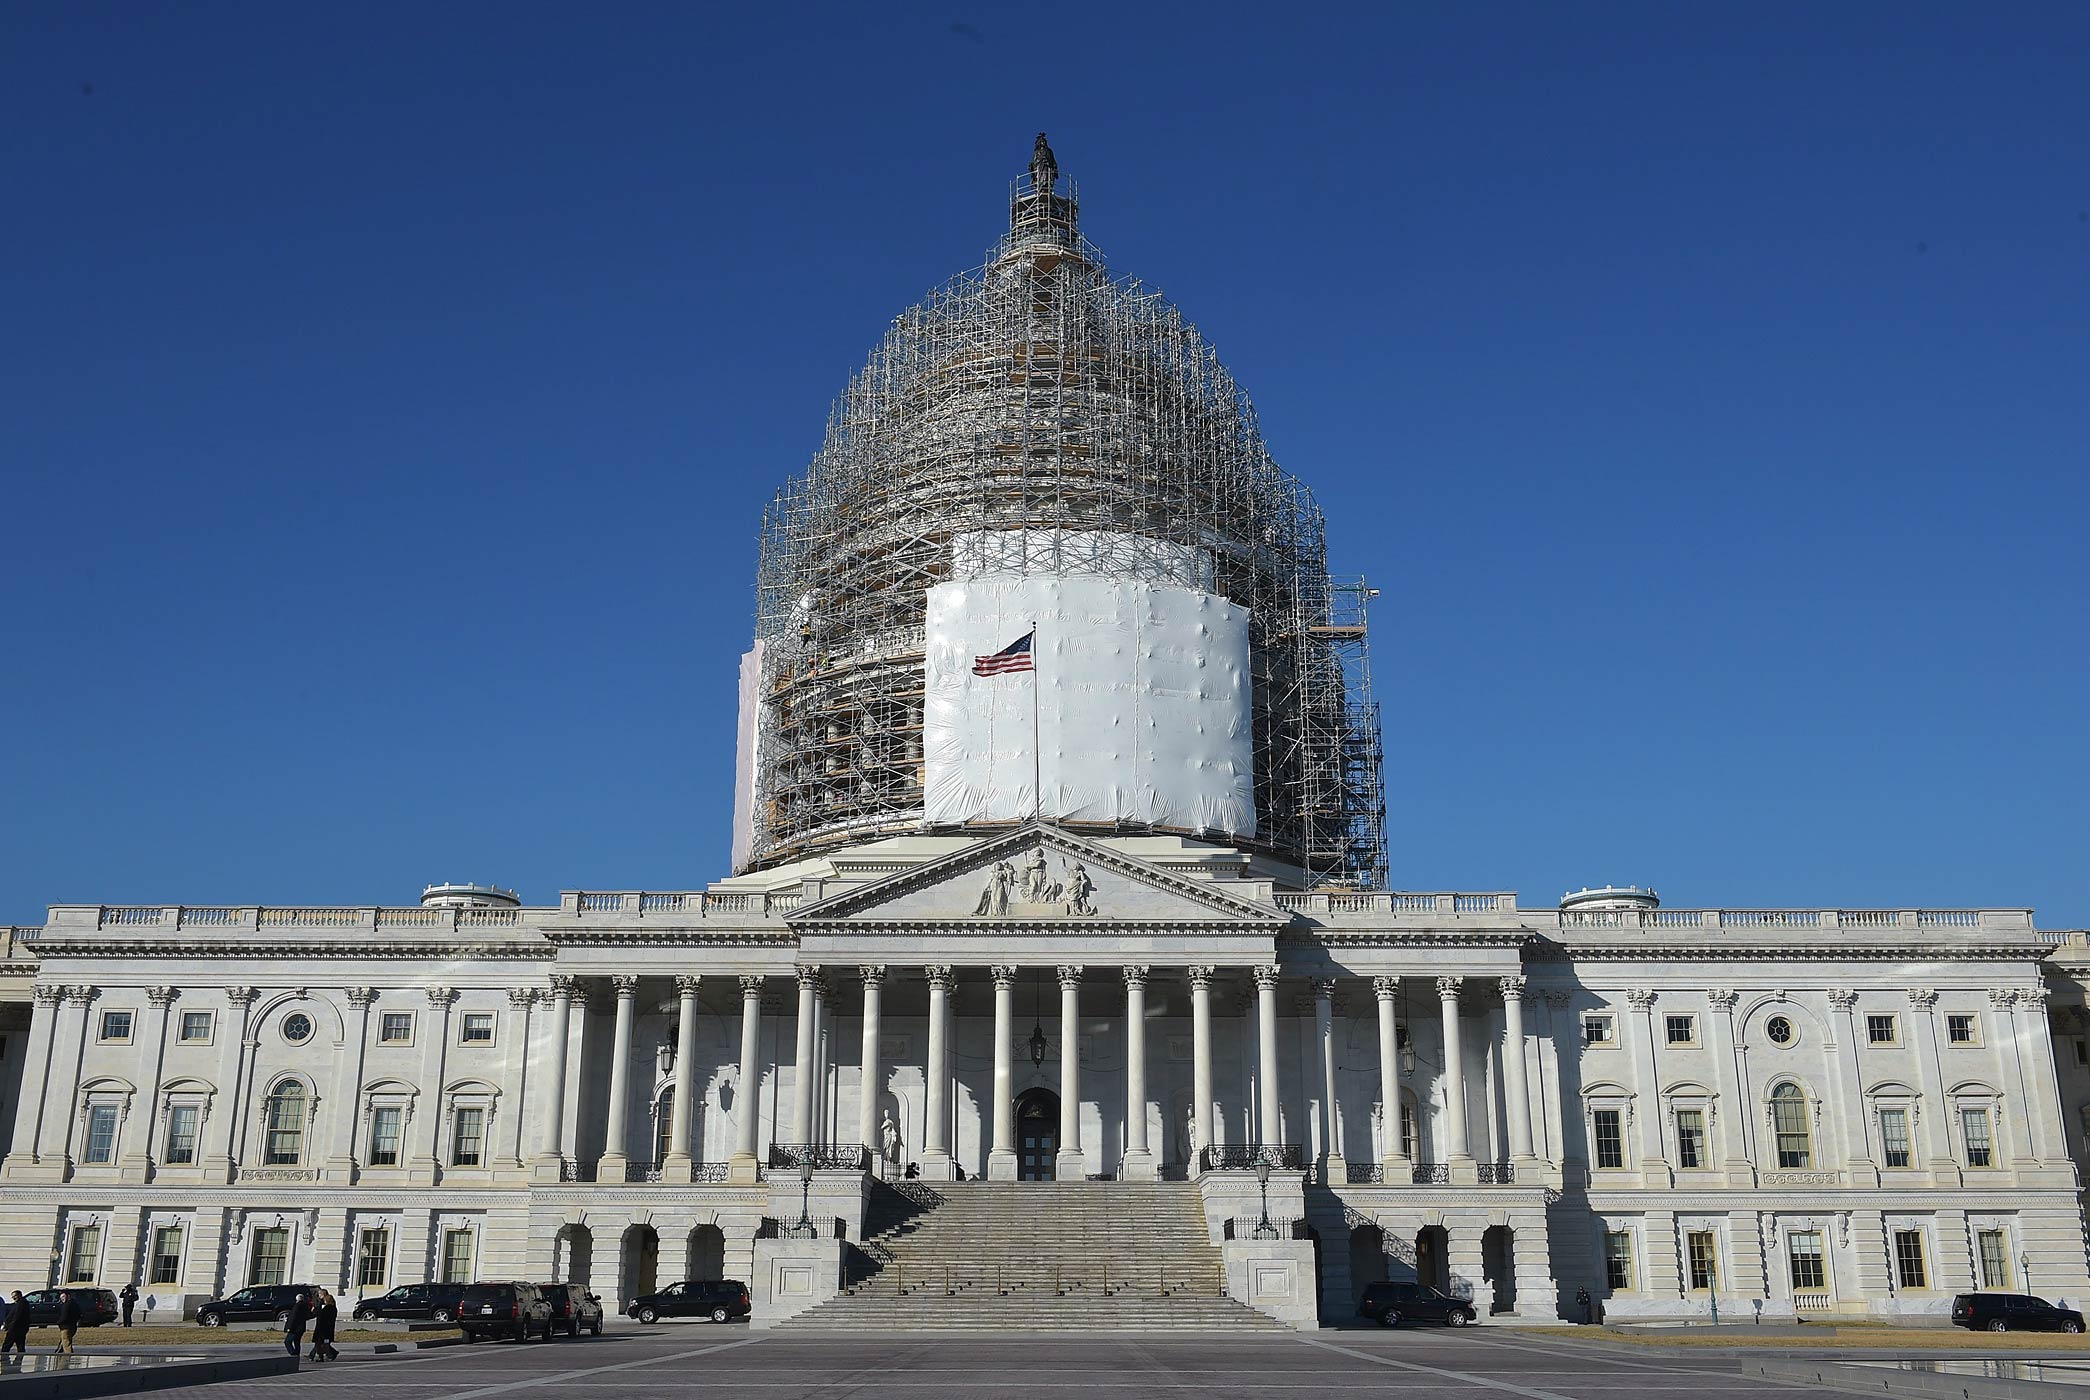 The US Capitol seen on Feb. 11, 2015 in Washington. (Mandel Ngan—AFP/Getty Images)